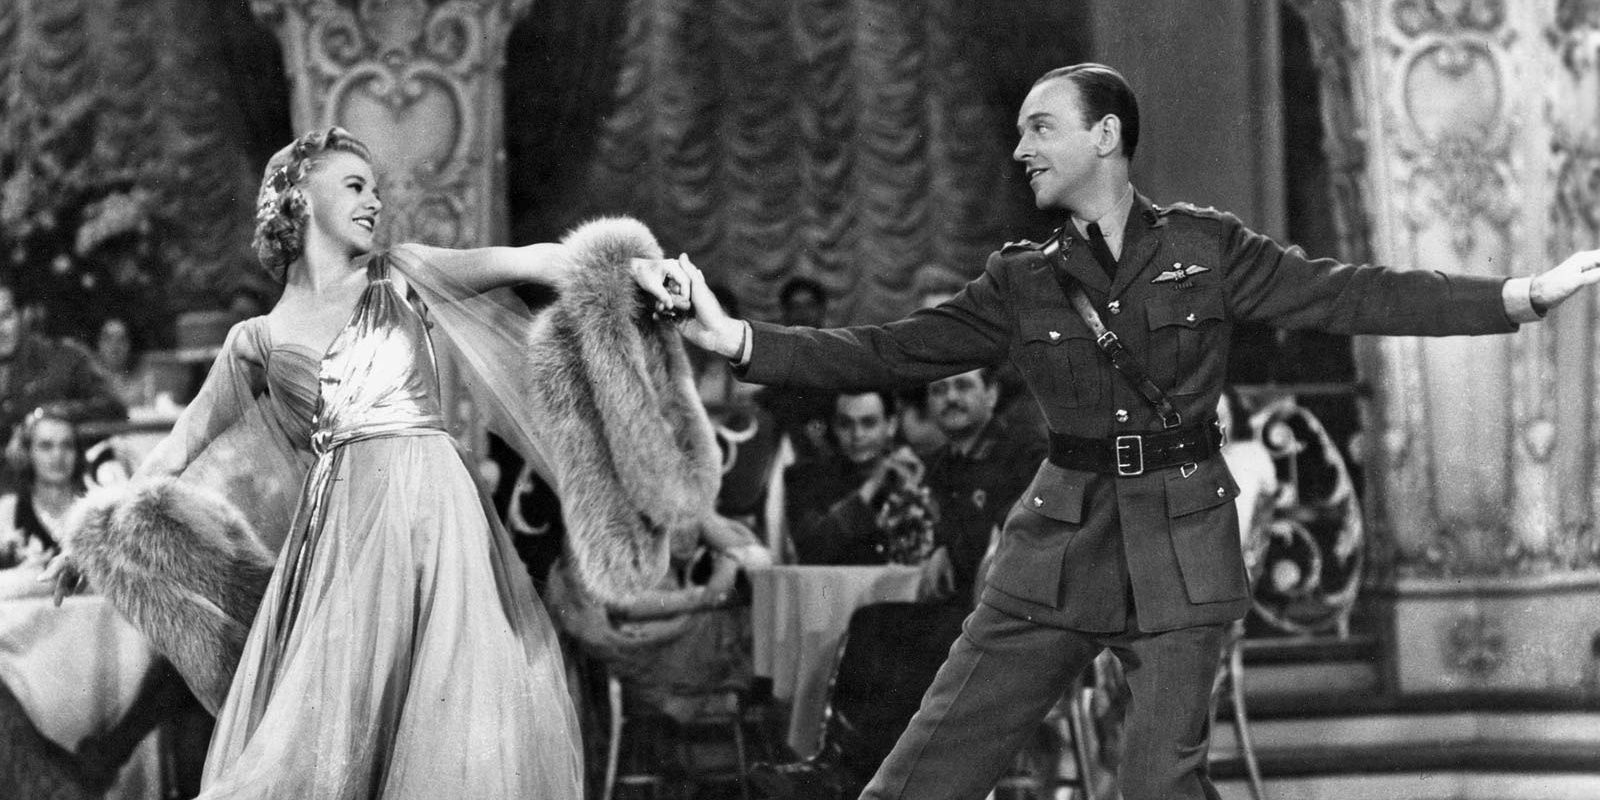 Fred Astaire & Ginger Rogers Movies Ranked (According To IMDb)